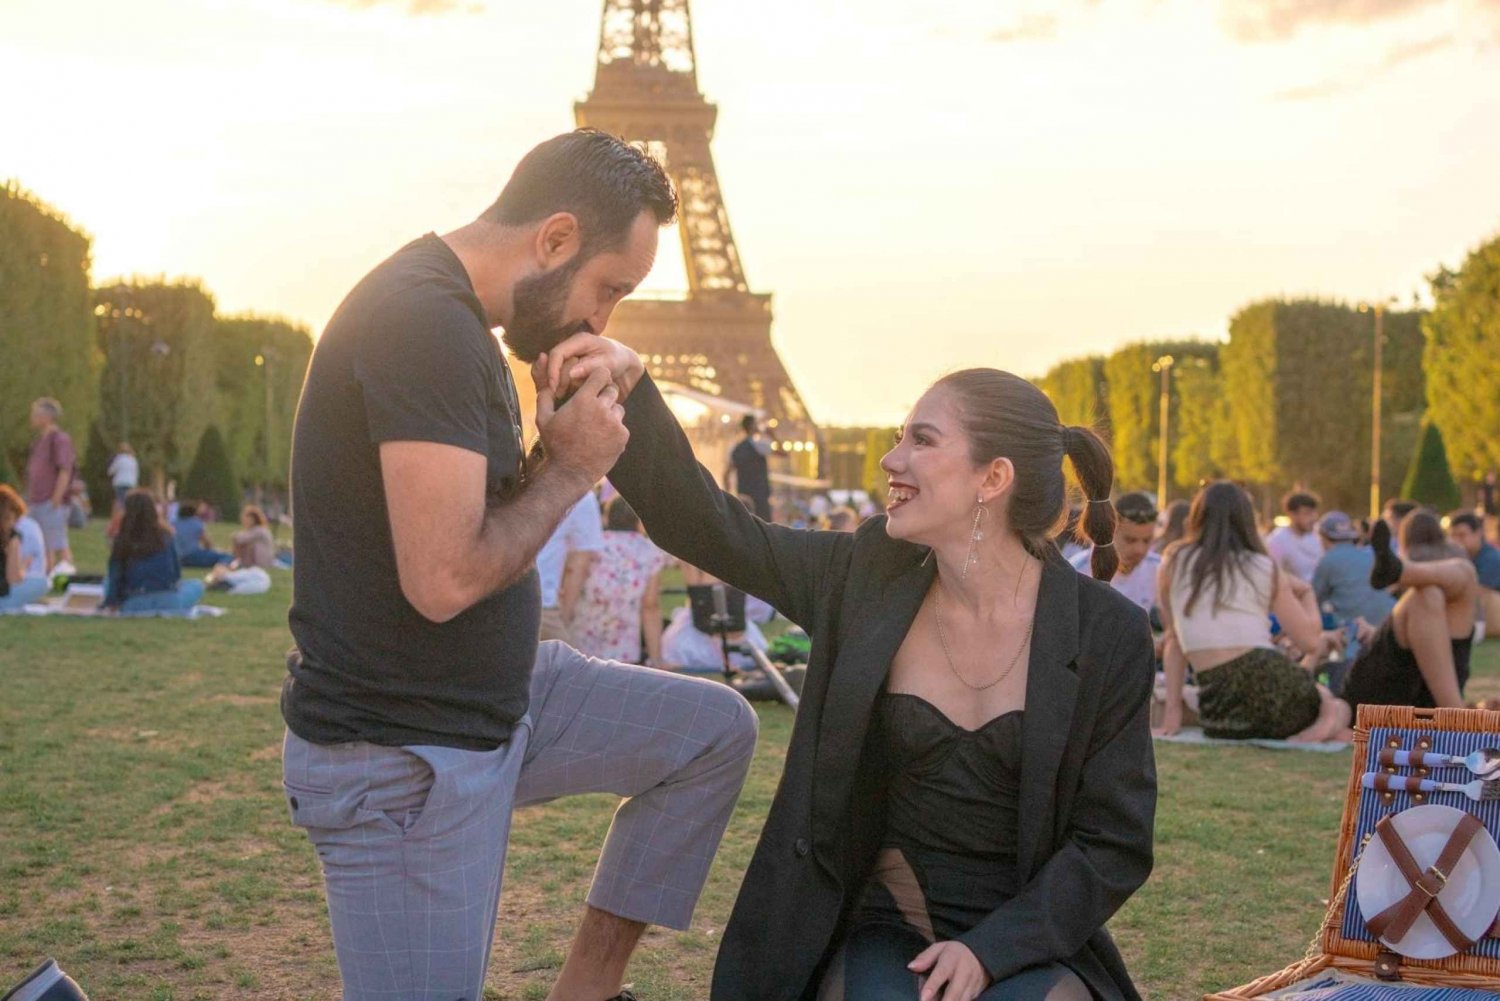 Paris: Picnic experience in front of the Eiffel Tower